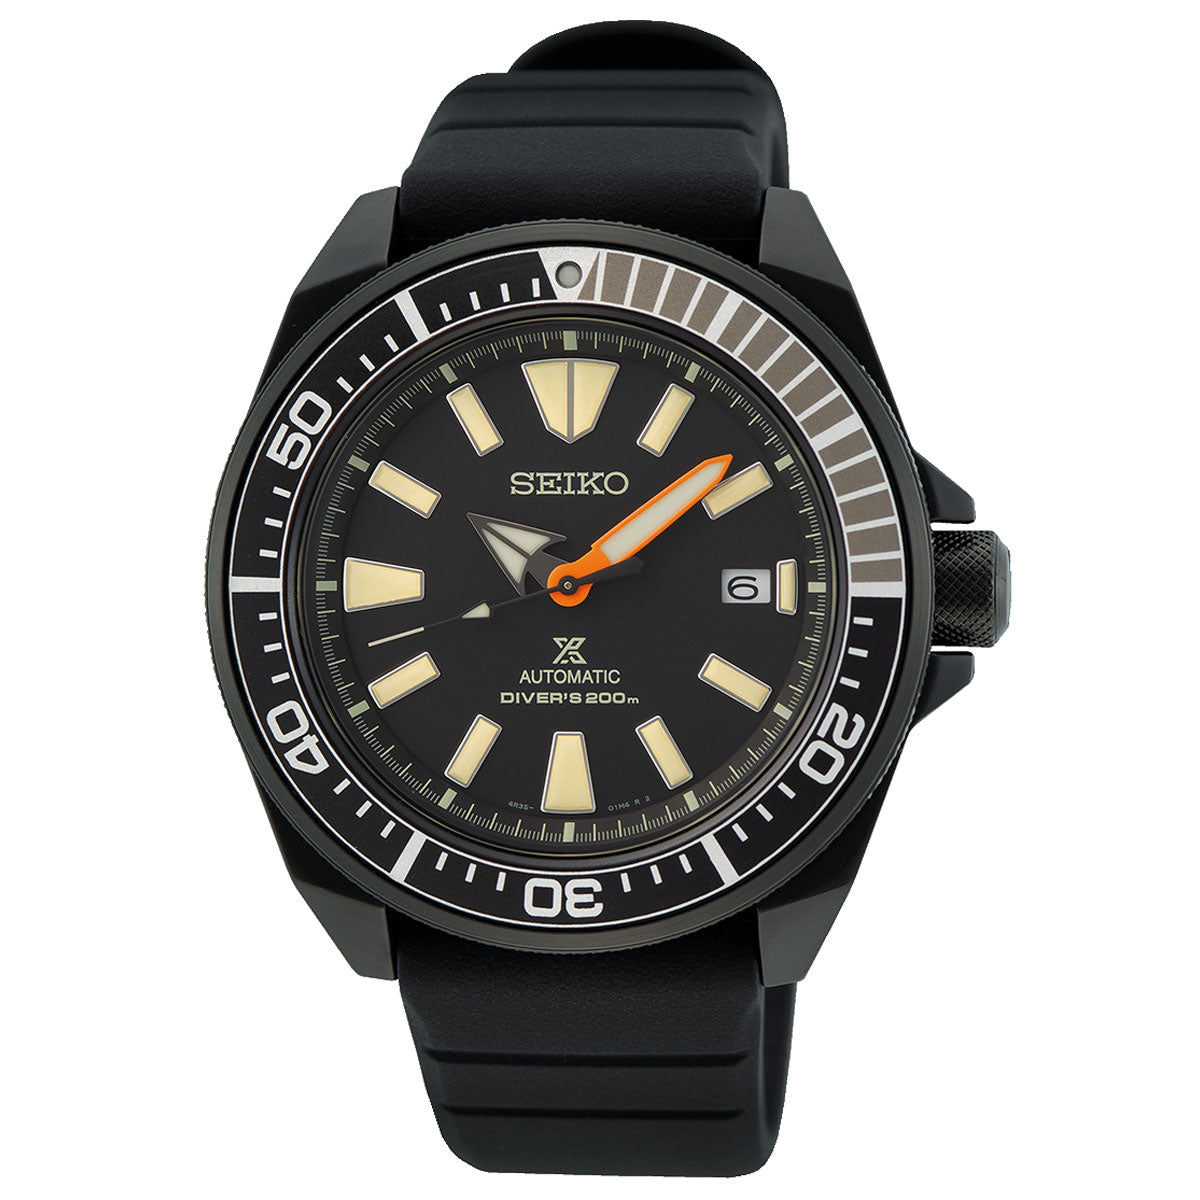 Seiko Prospex Sea Black Series Limited Edition Automatic With Manual Winding 43.8mm Watch